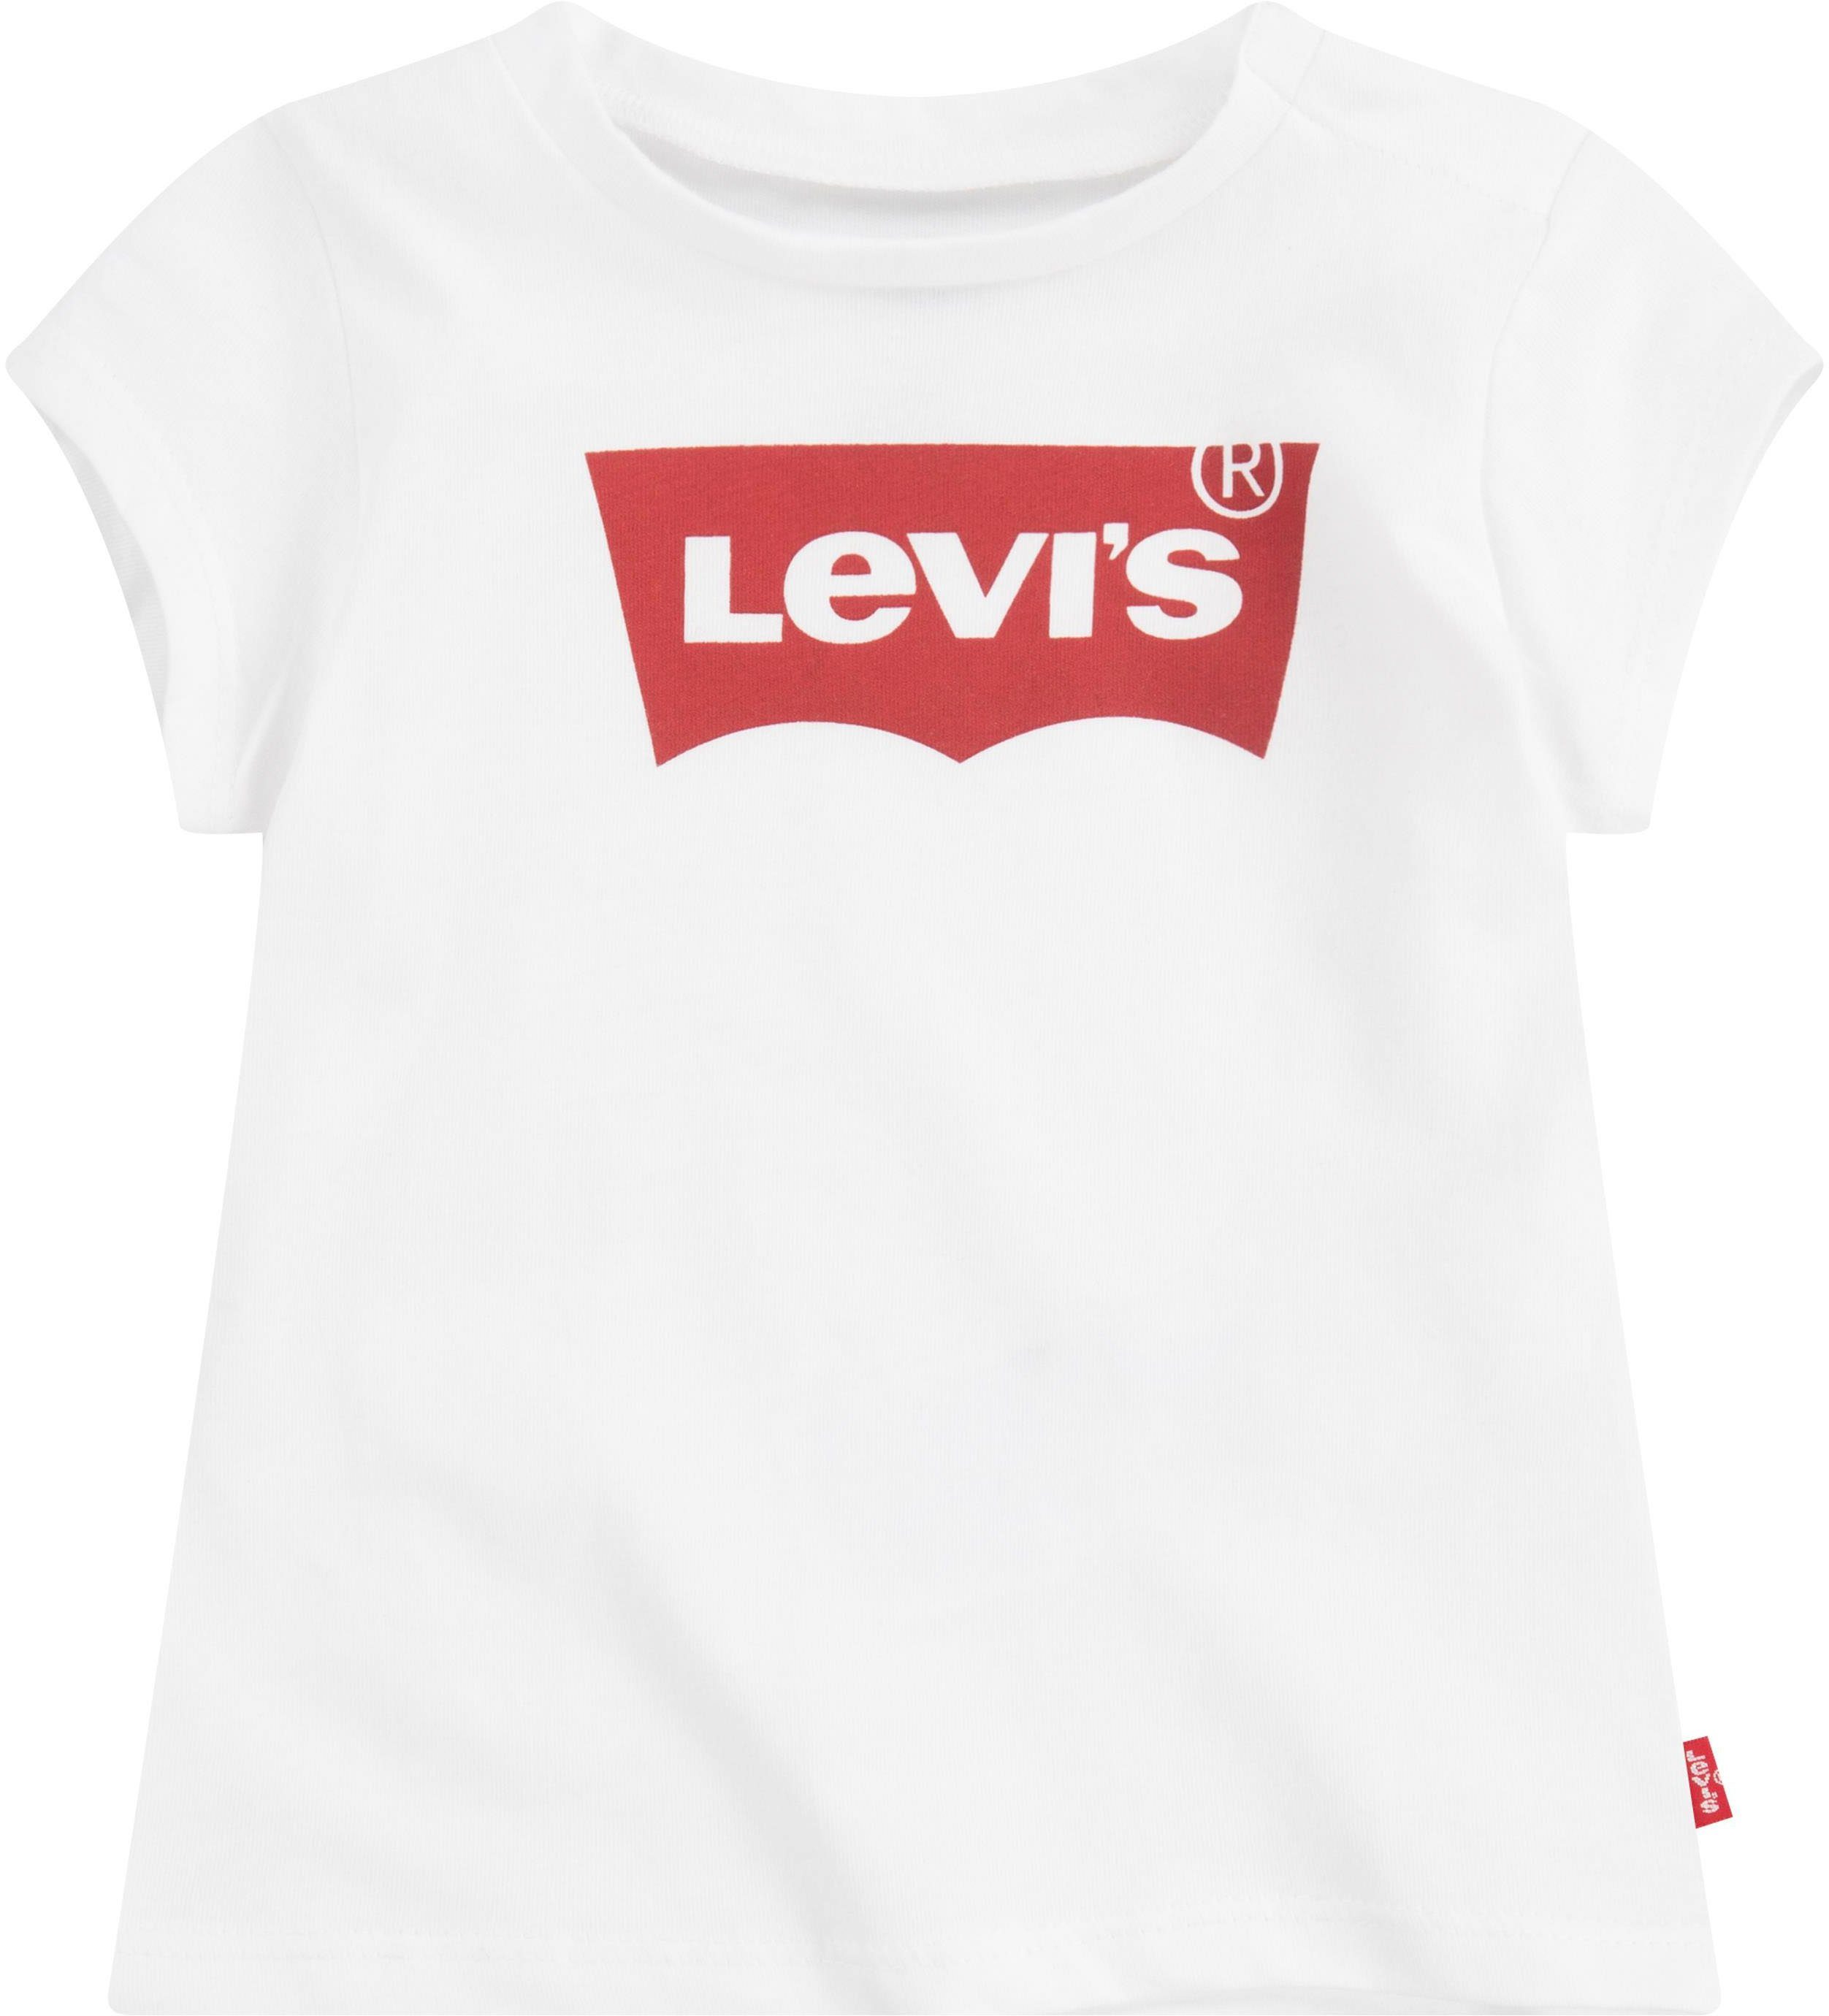 Levi's® for BATWING Kids GIRLS T-Shirt TEE white/red